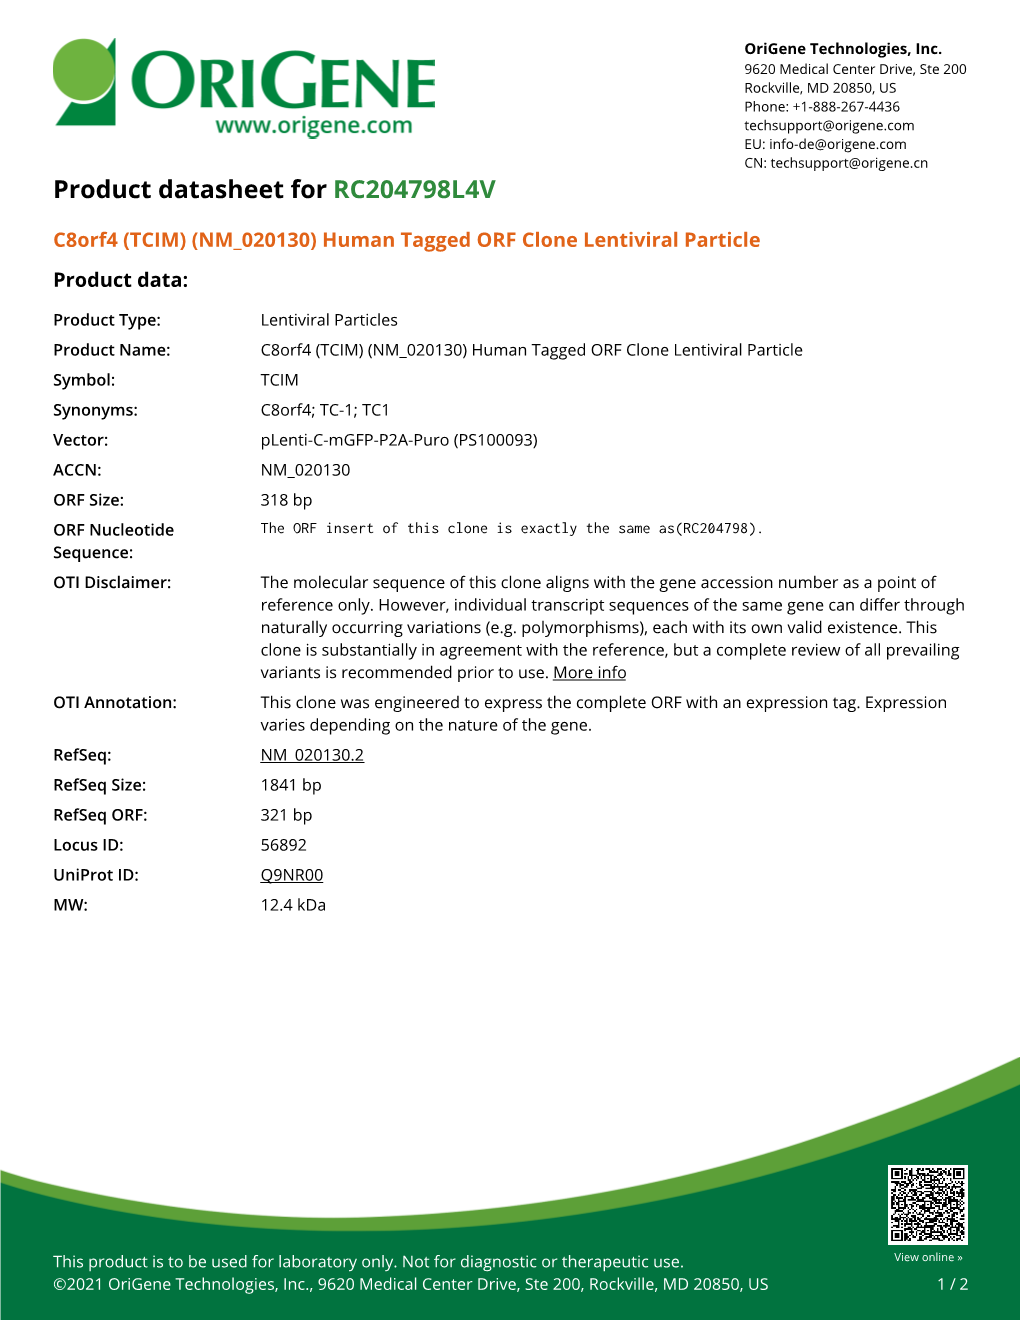 C8orf4 (TCIM) (NM 020130) Human Tagged ORF Clone Lentiviral Particle Product Data